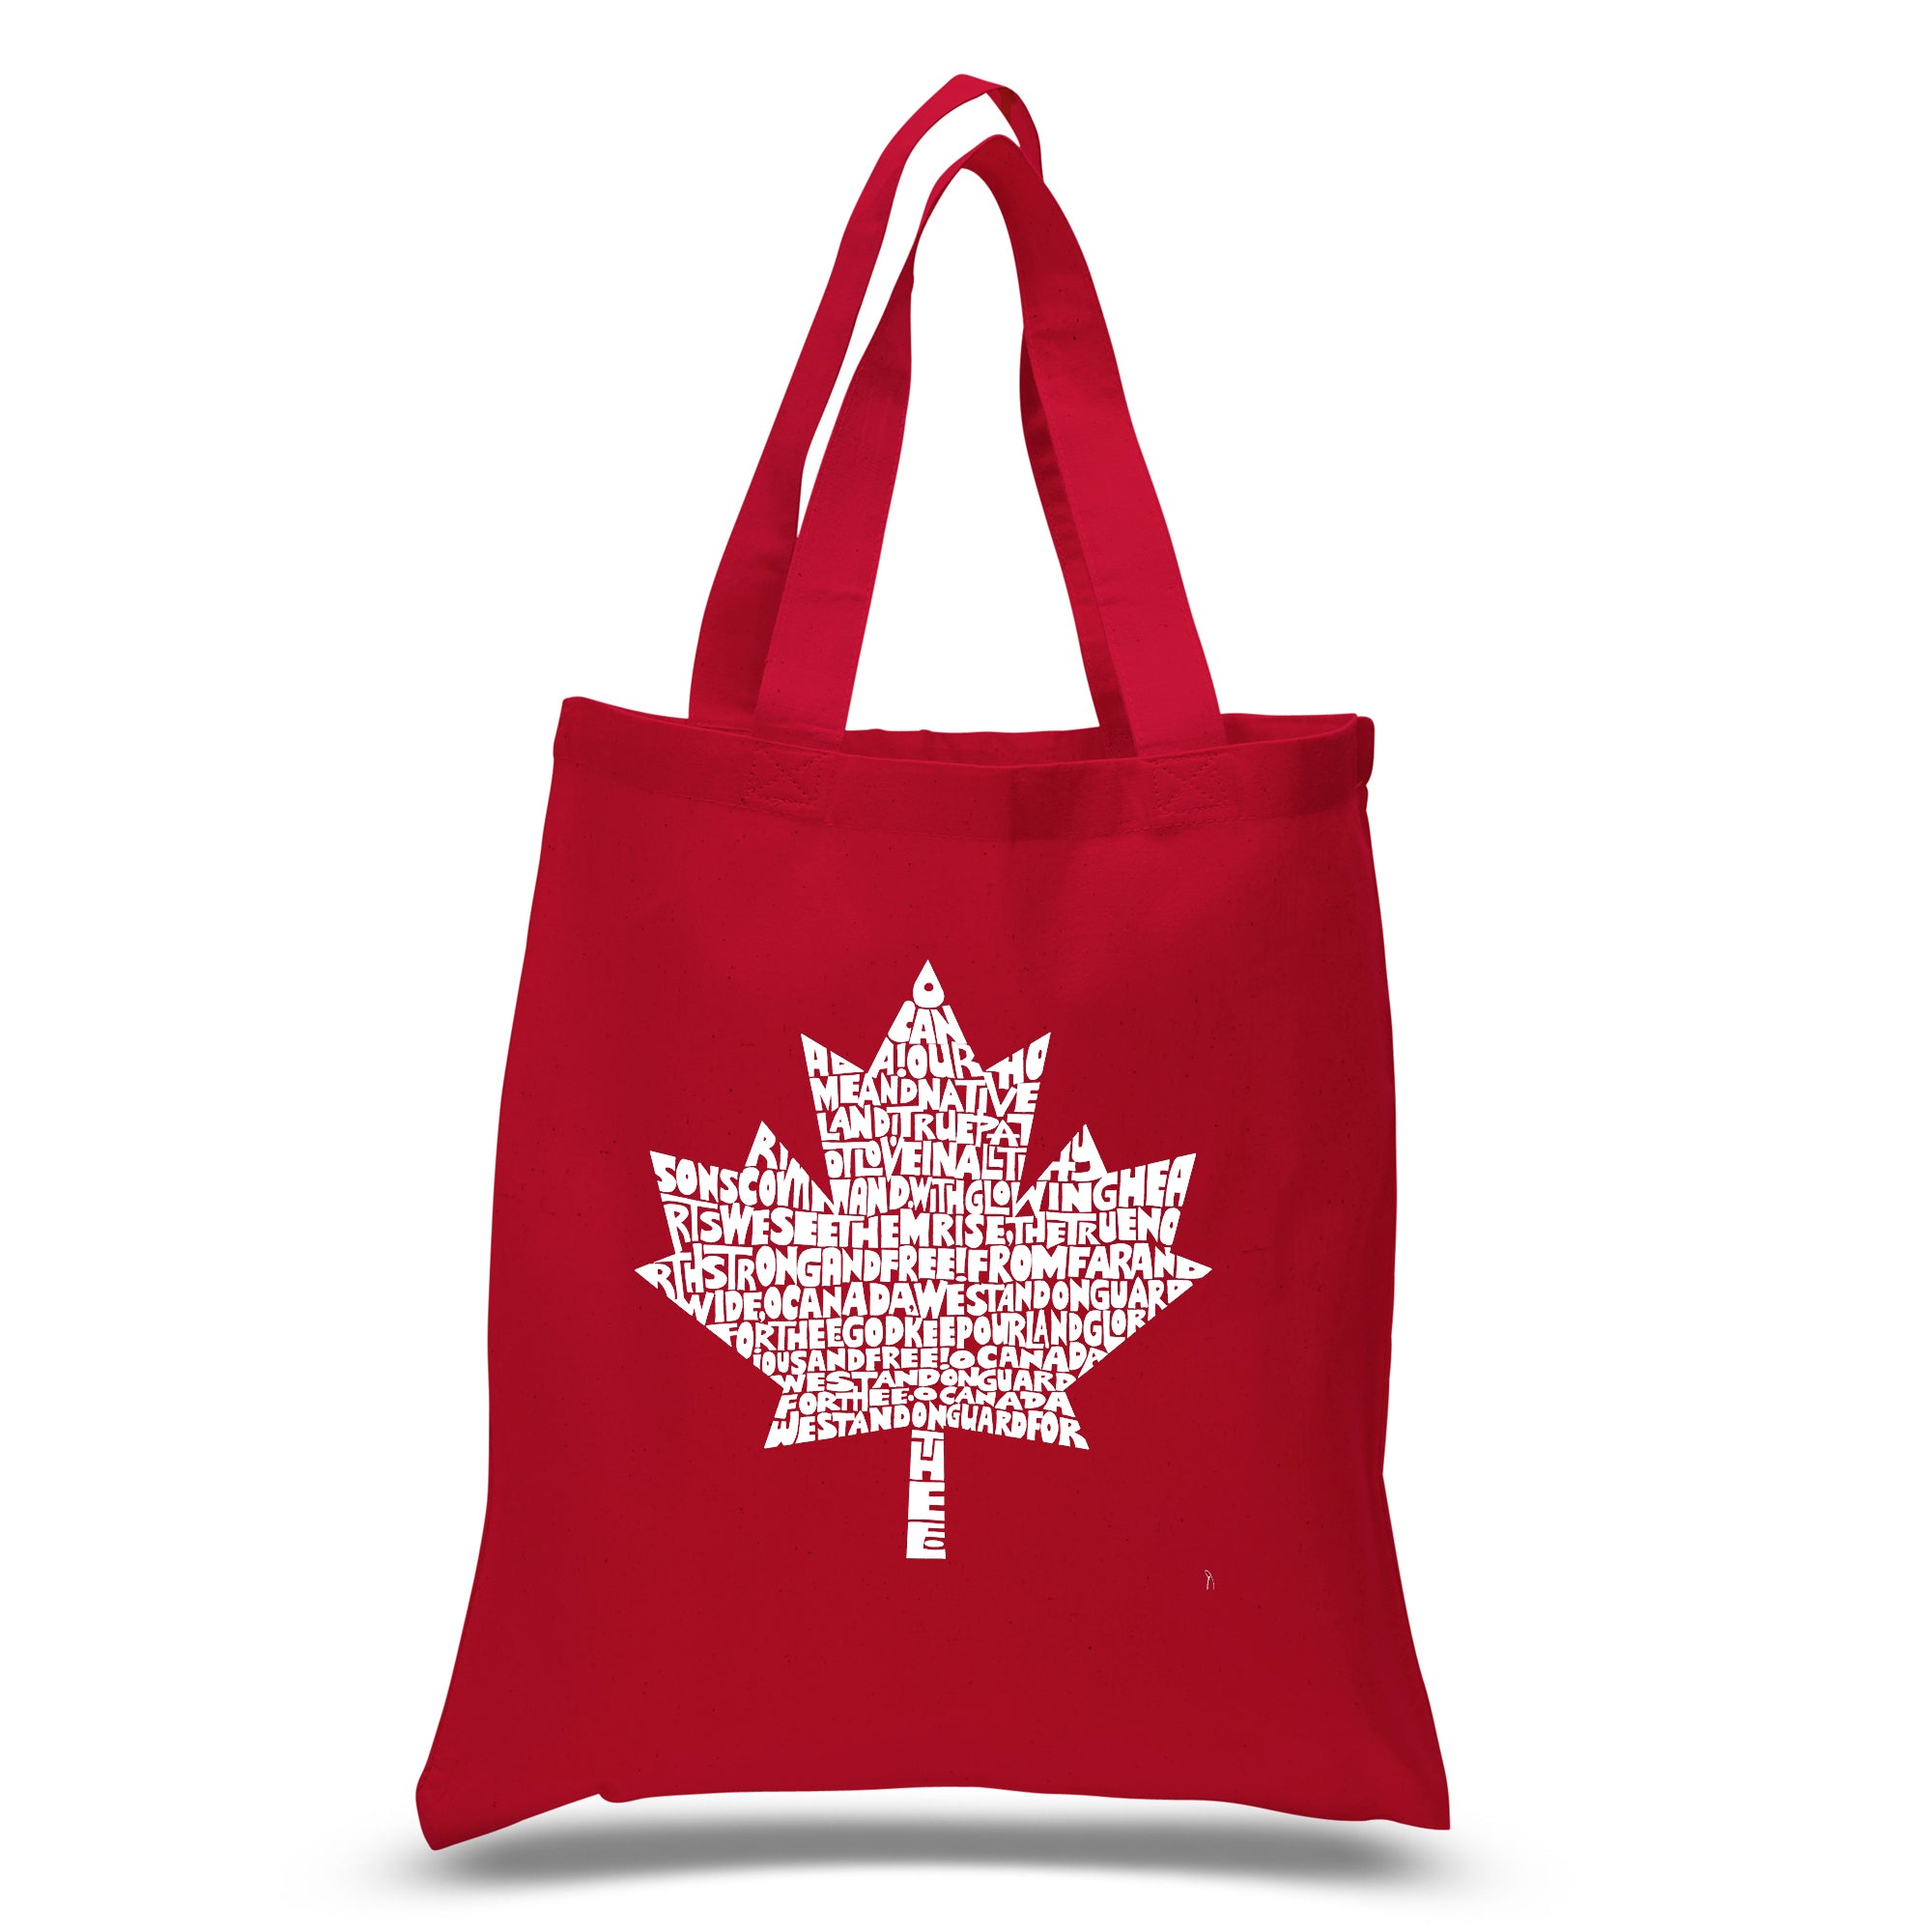 MUJI Canada - We have special tote bags with designs... | Facebook